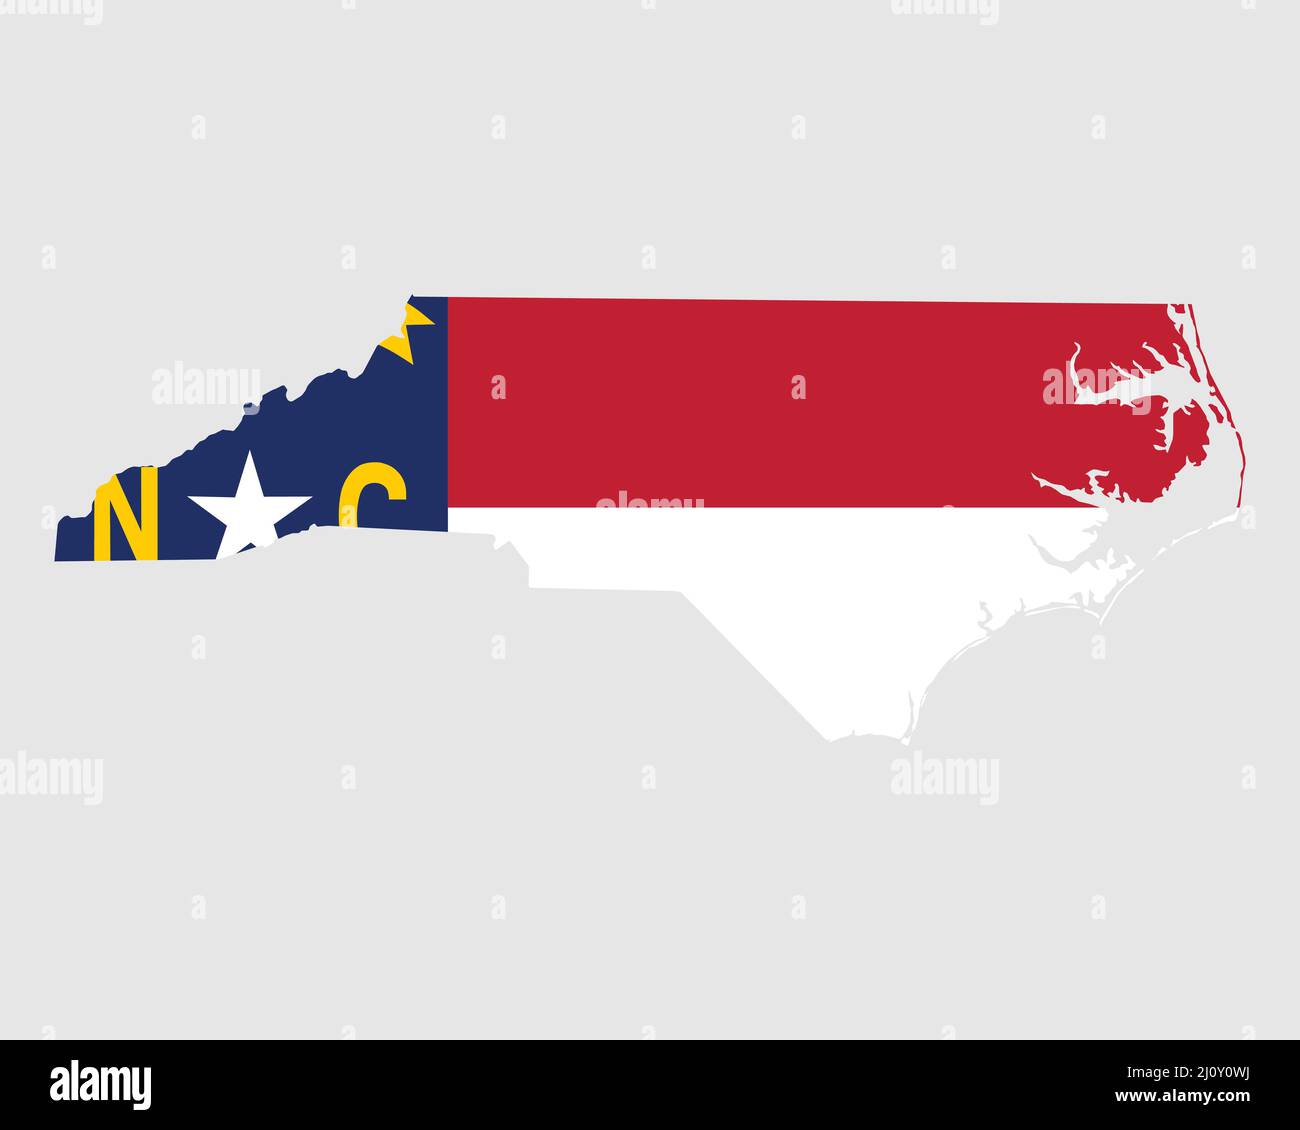 North Carolina Map Flag. Map of NC, USA with the state flag. United States, America, American, United States of America, US State Banner. Vector illus Stock Vector